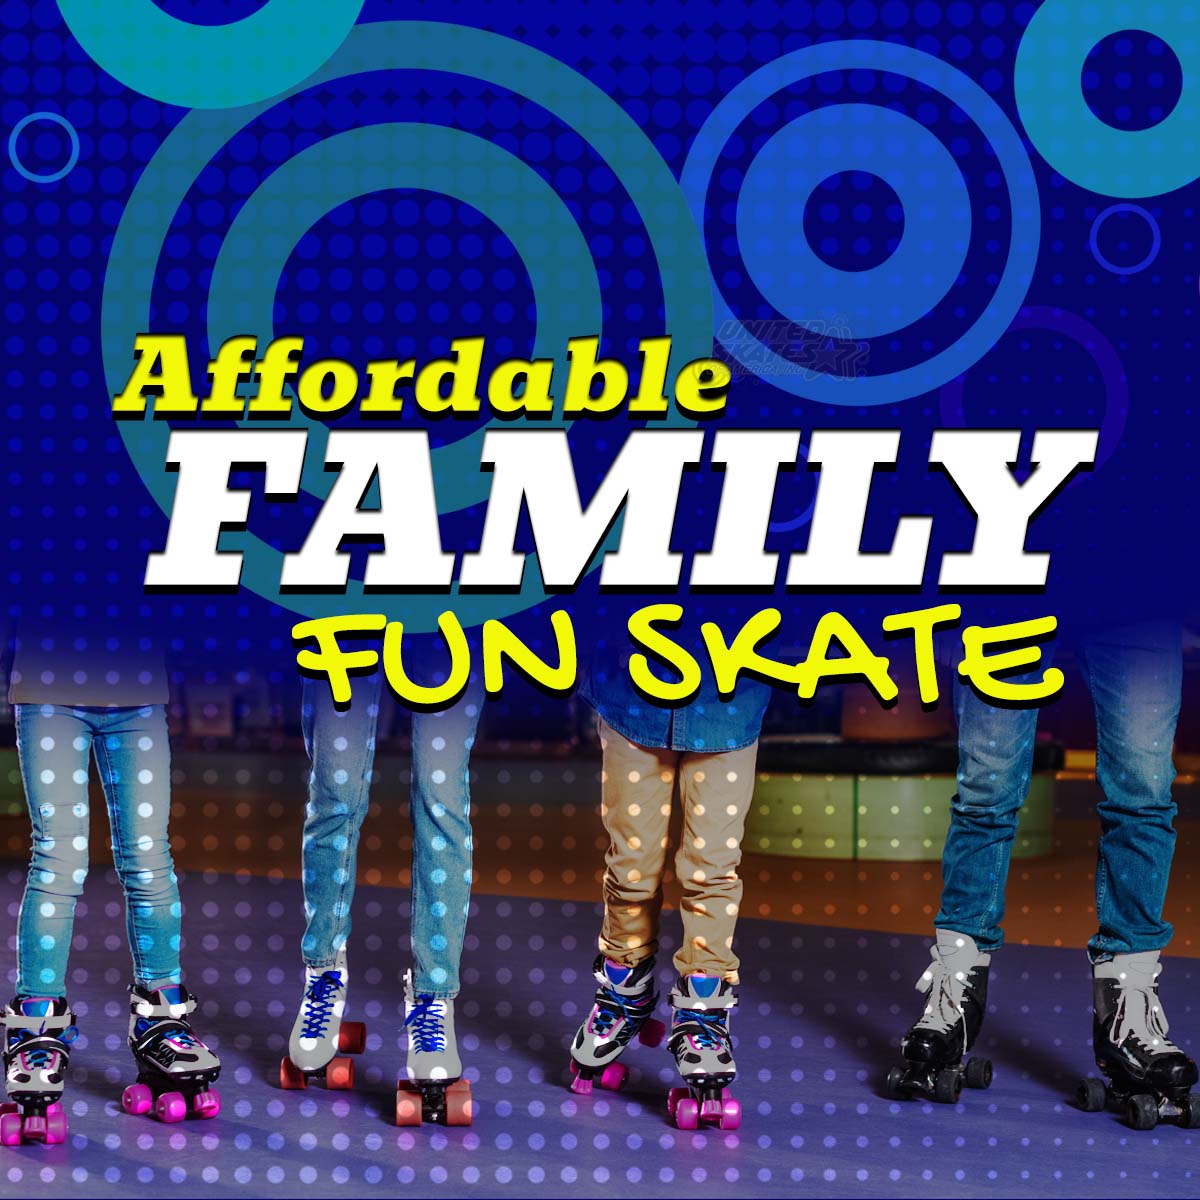 Skateland Indy Affordable Family Fun